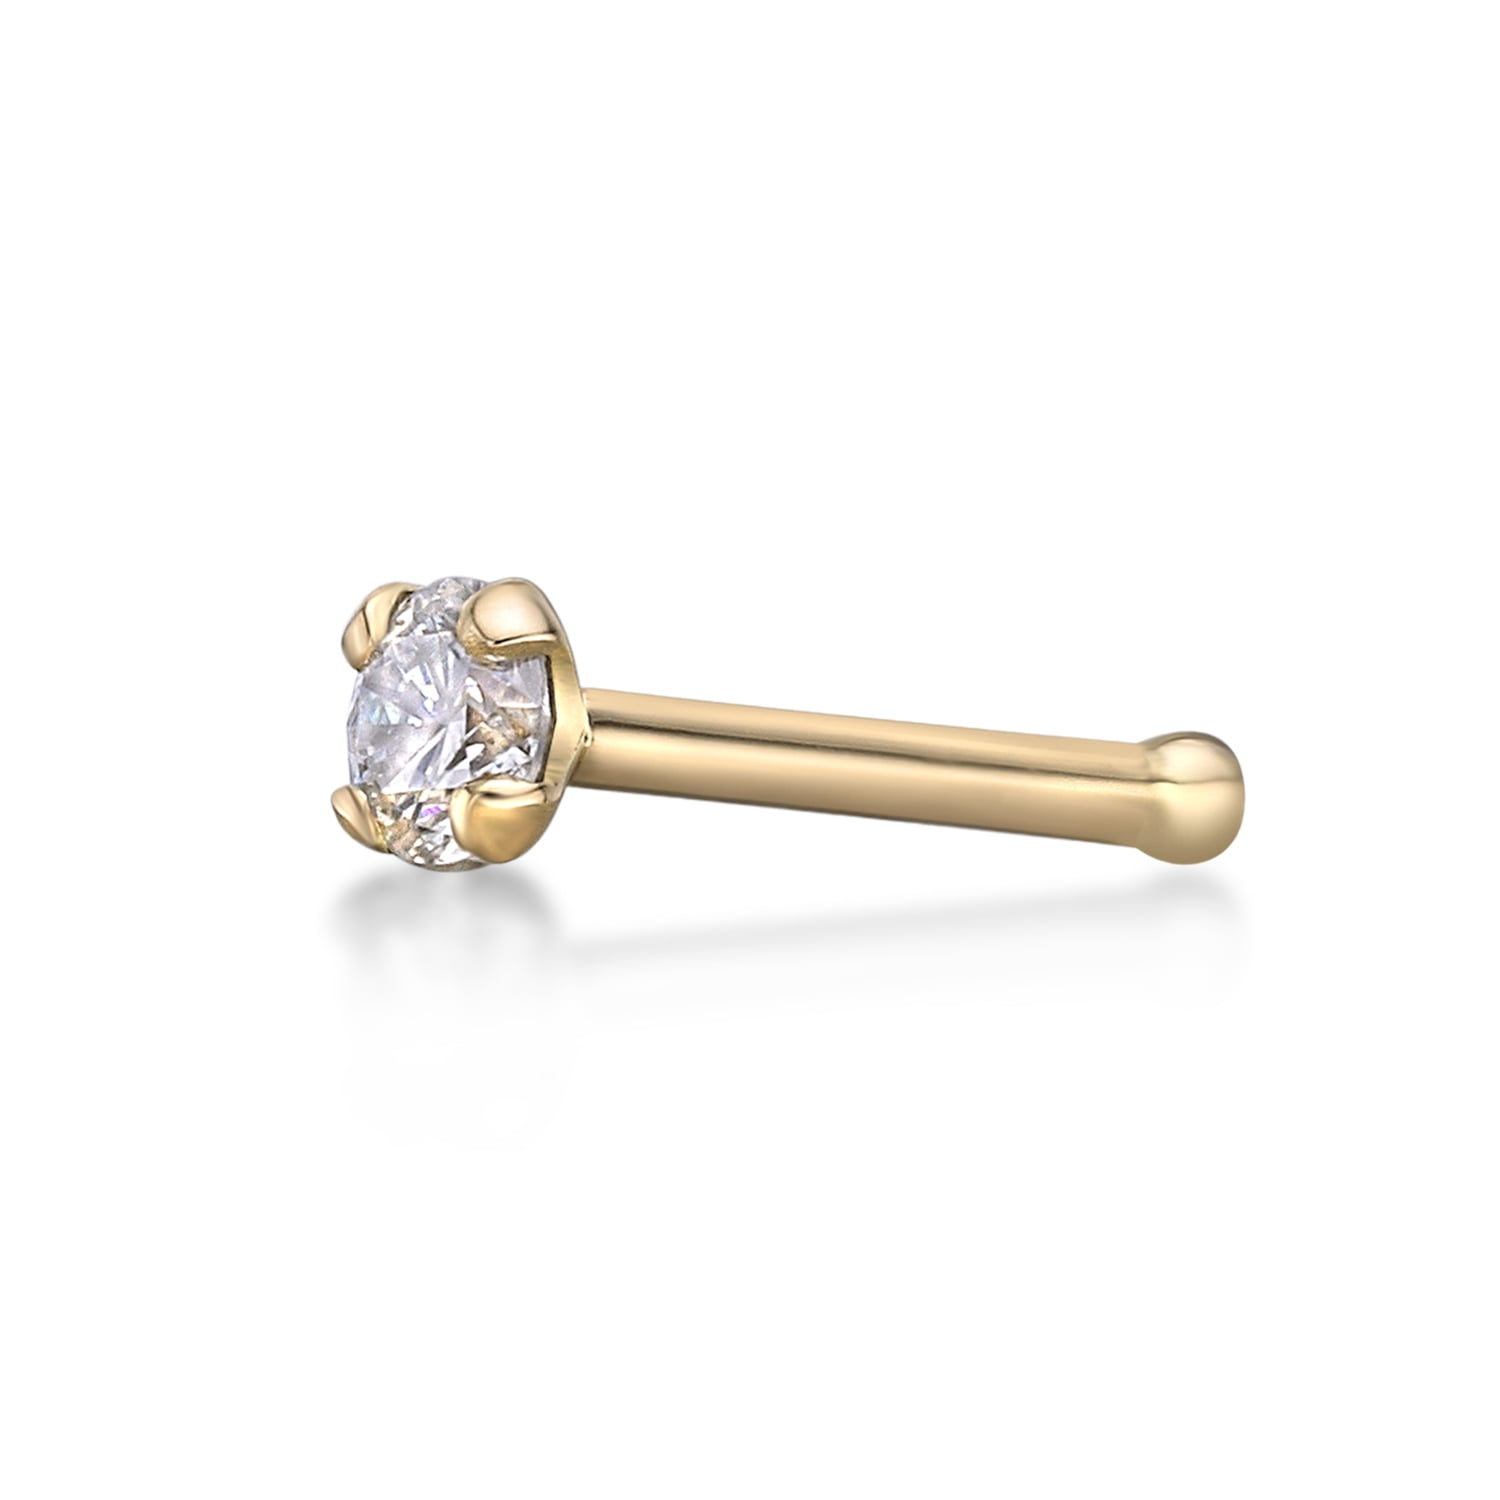 22 Gauge Curved Screw 14K Yellow Gold .07 cttw Diamond Nose Ring 